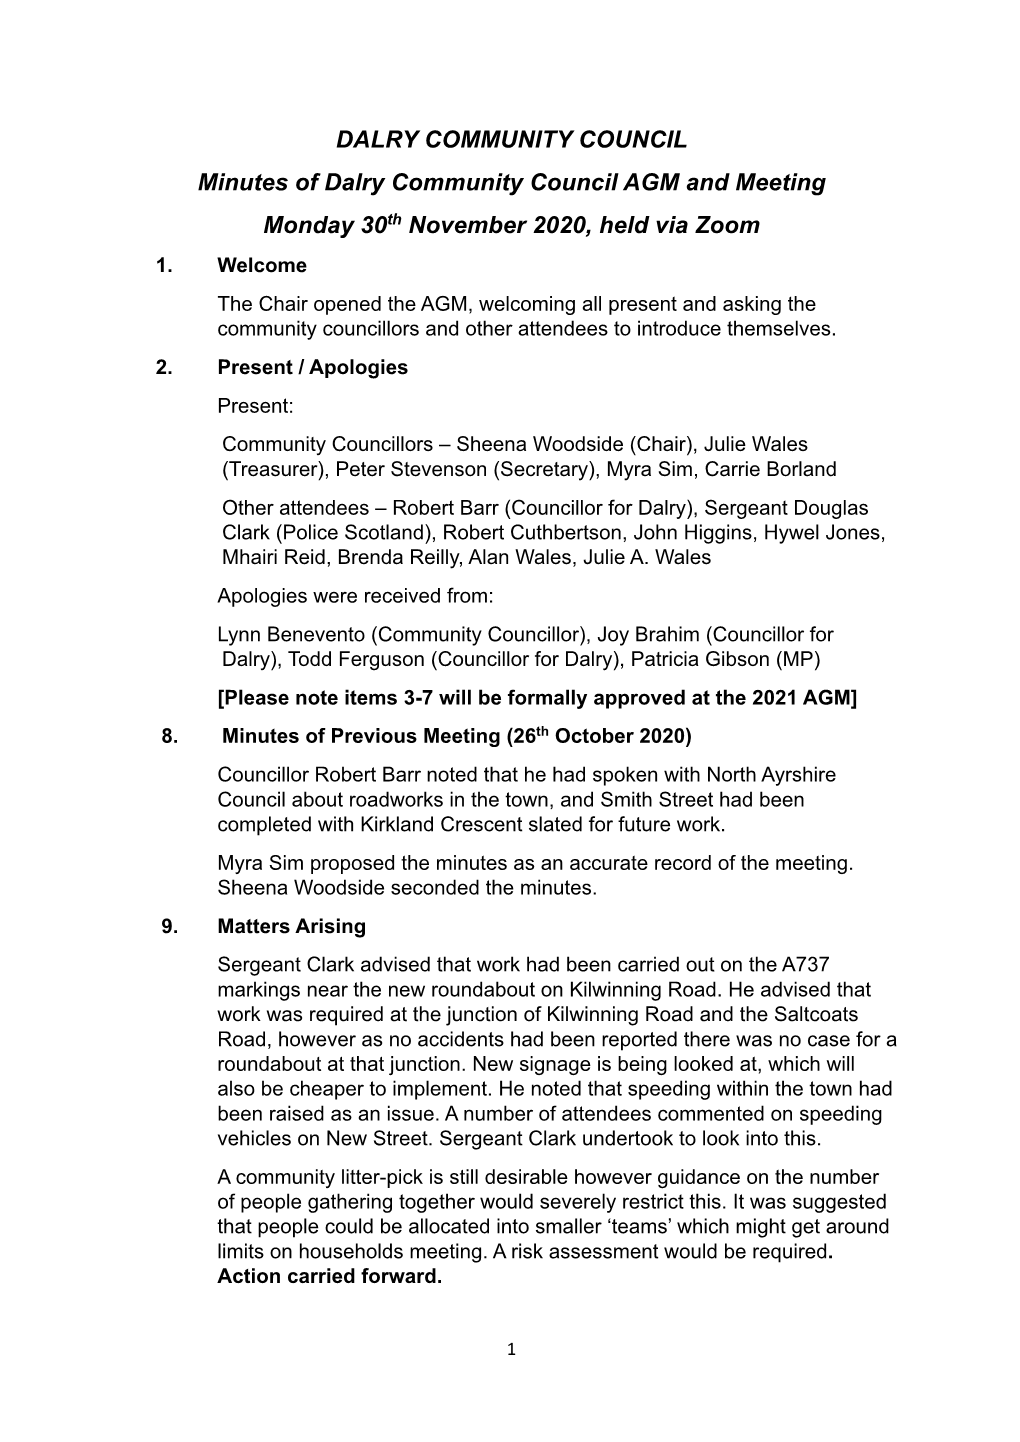 DALRY COMMUNITY COUNCIL Minutes of Dalry Community Council AGM and Meeting Monday 30Th November 2020, Held Via Zoom